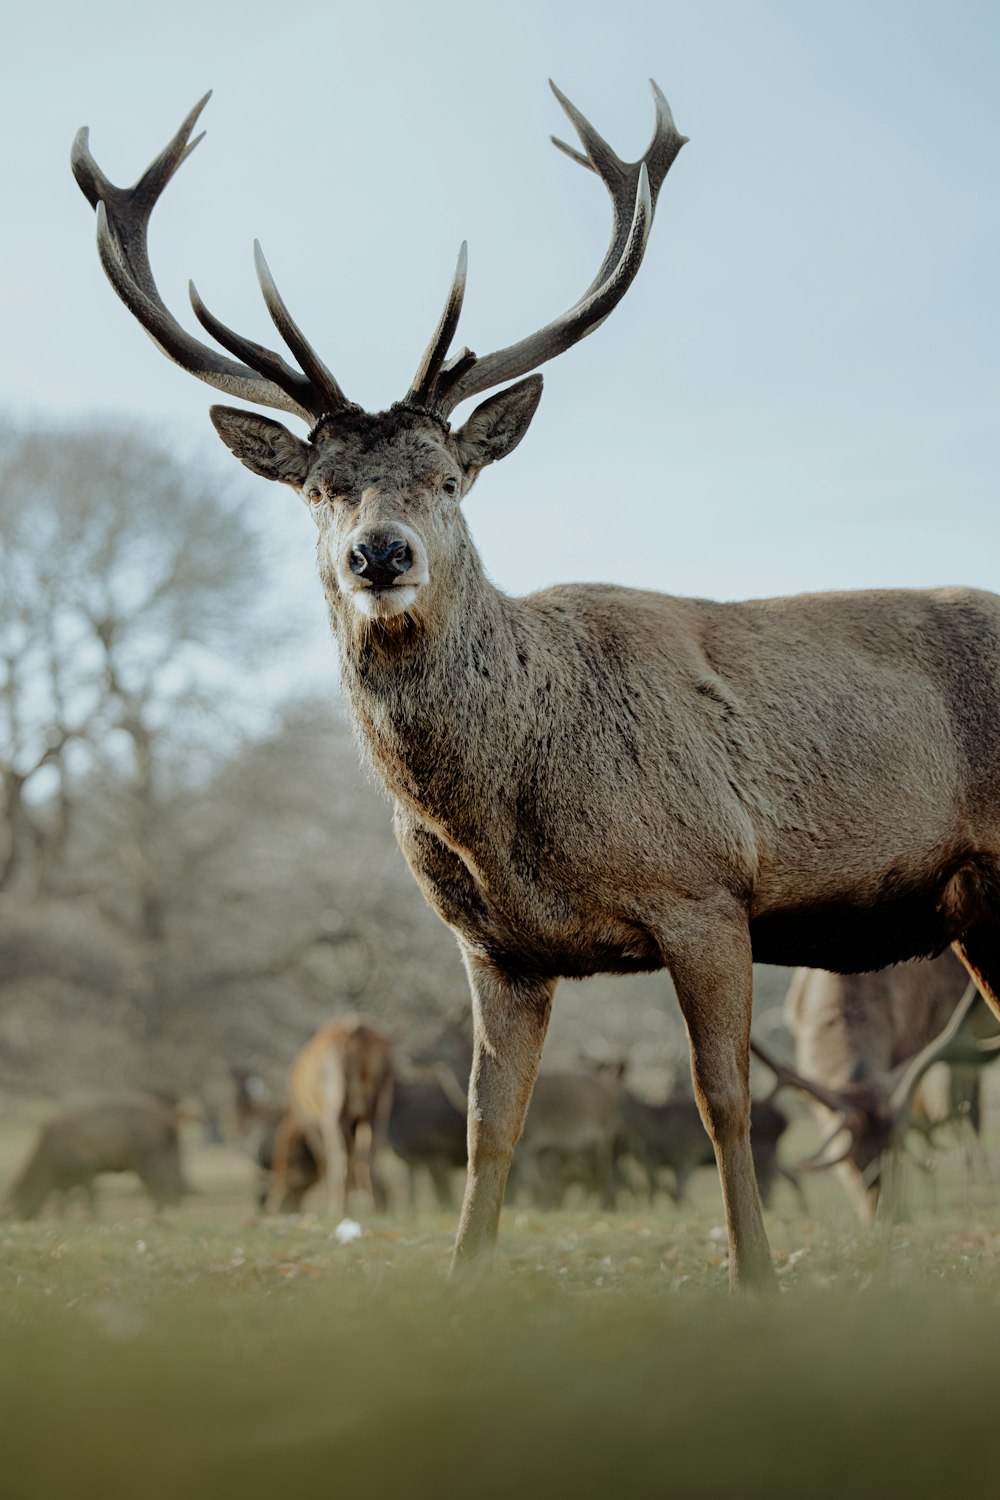 a deer with large antlers standing in a field